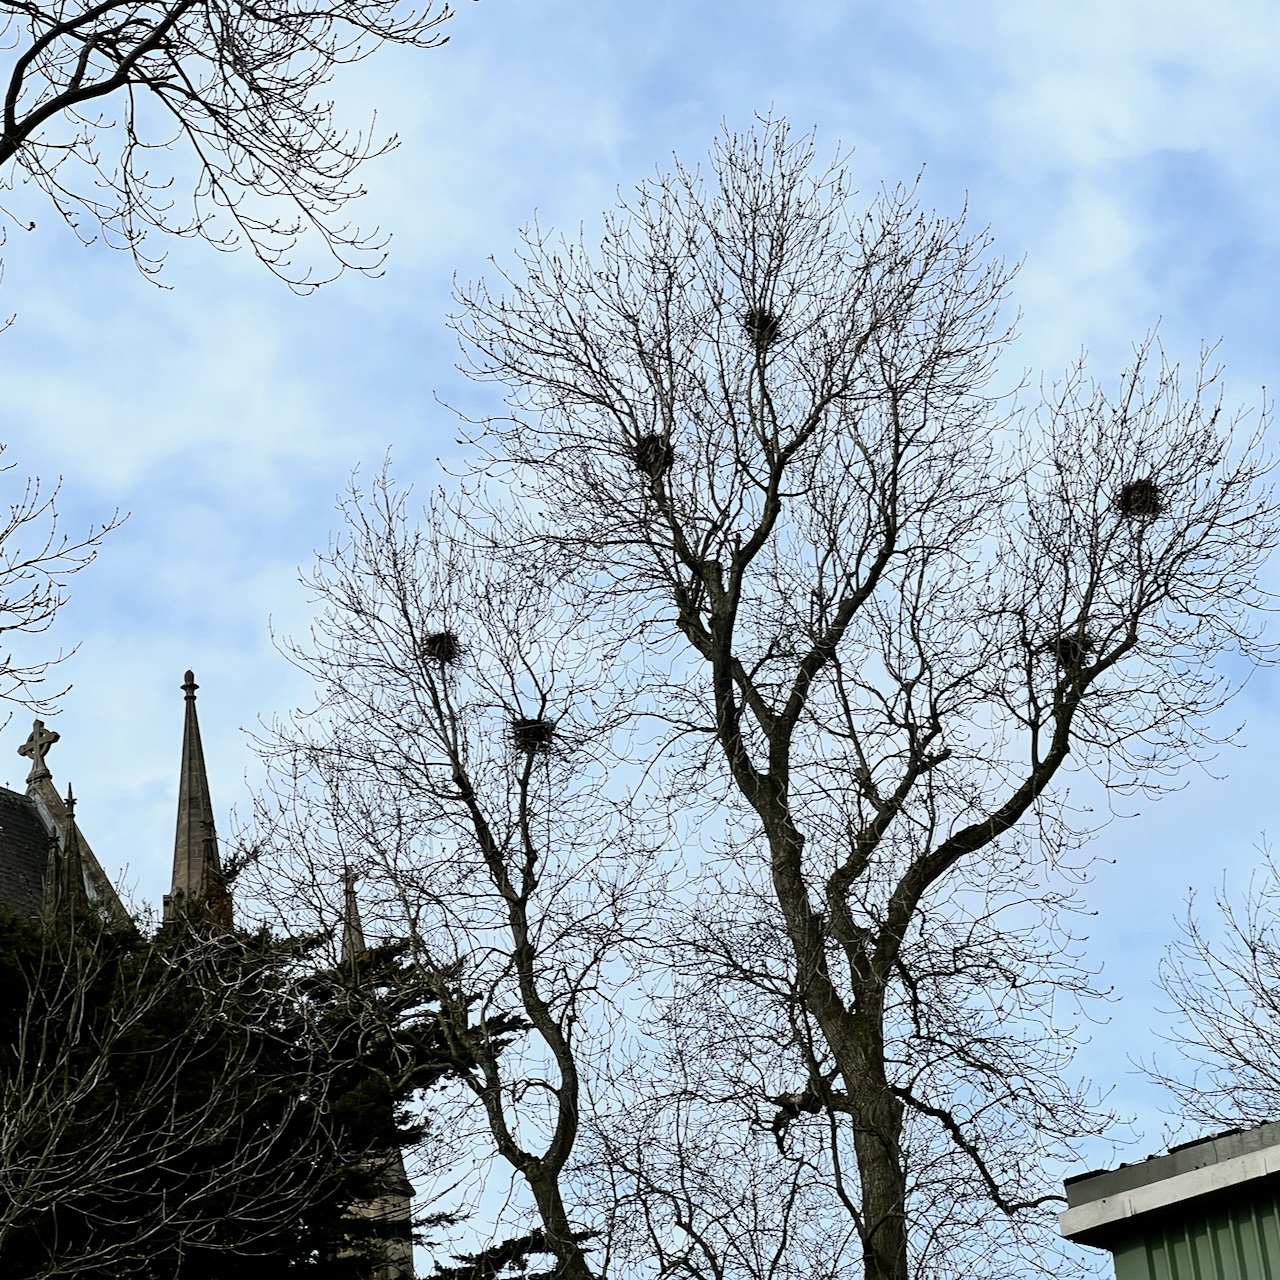 Corvids nesting in a tree at Lancing College